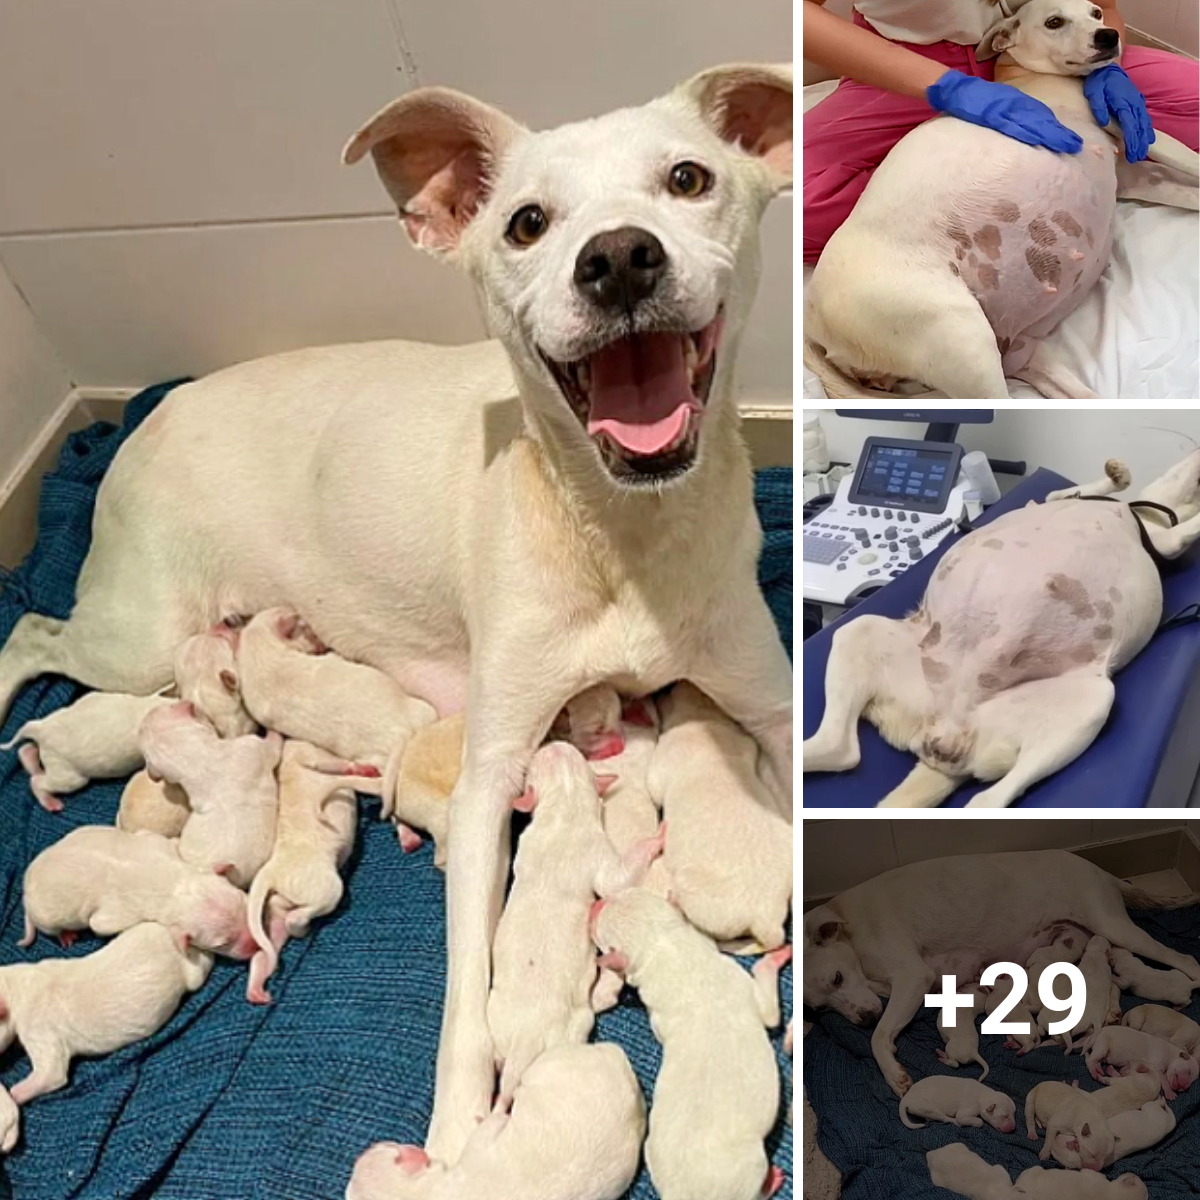 At our shelter, a pregnant mother dog gave birth to fourteen beautiful puppies. It feels very happy